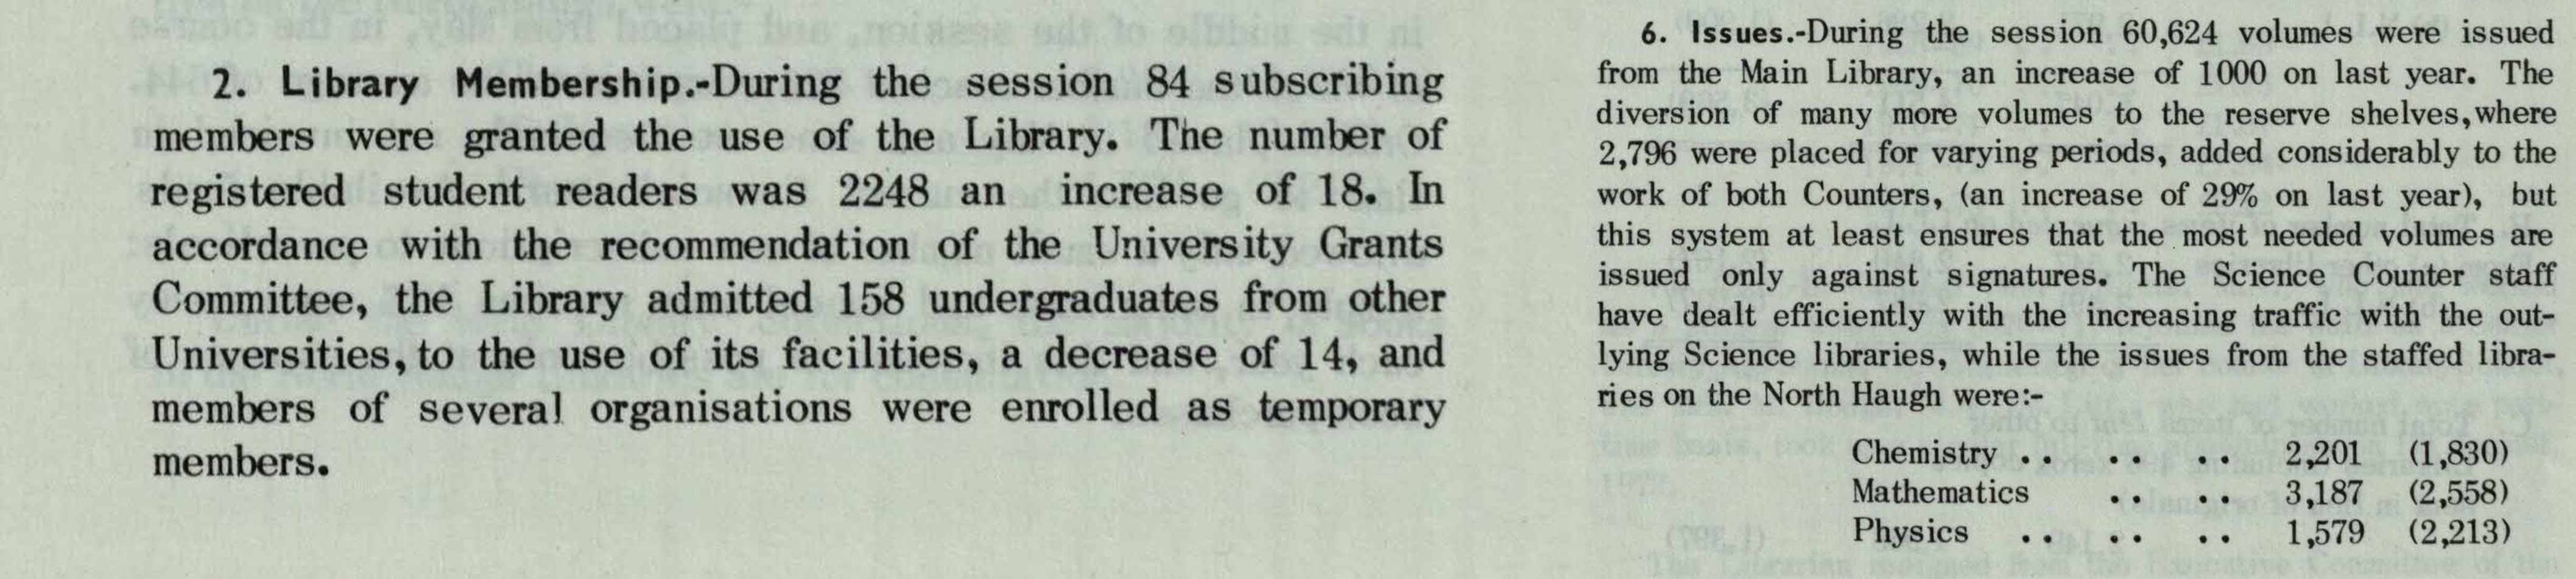 Extracts from Abstract of Library Report 1972-73, revealing library membership and the number of items issued for the session 1972/73 (UYLY465). 